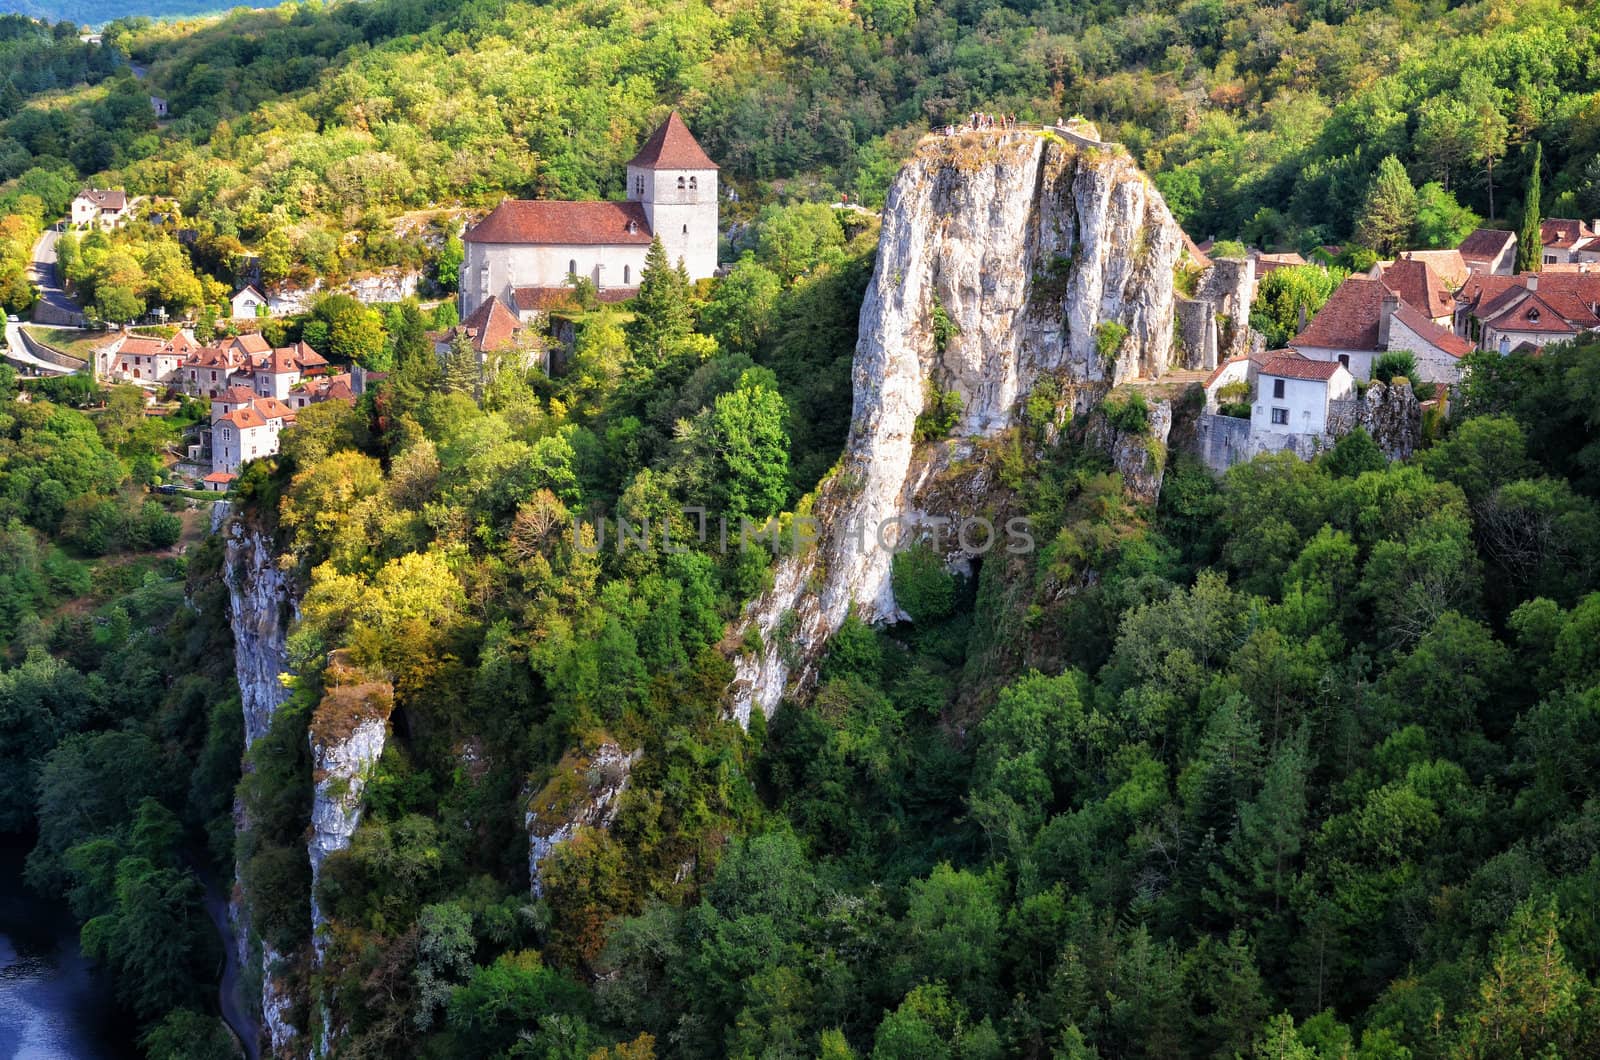 Cirq la Popie village on the cliffs scenic view, France by martinm303